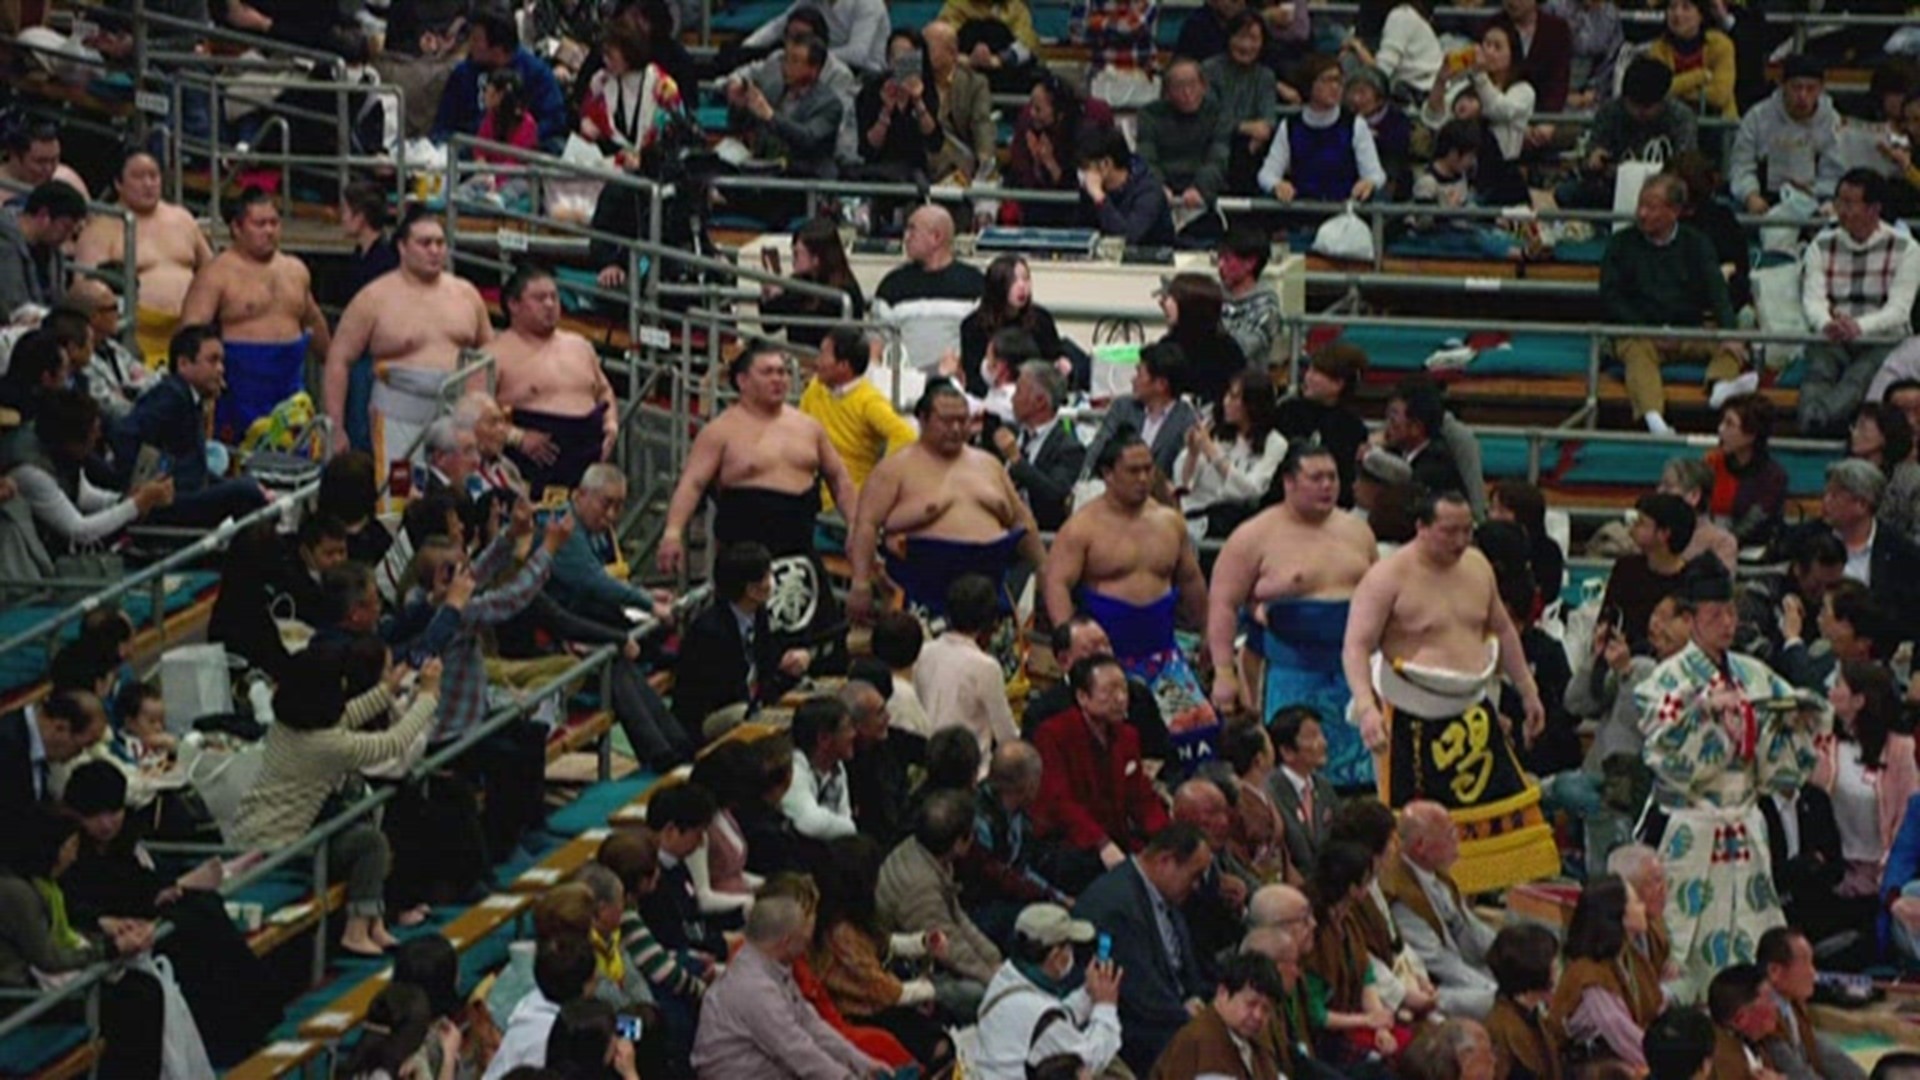 There is nothing grander in Japan's wonderful sporting tradition than sumo wrestling.